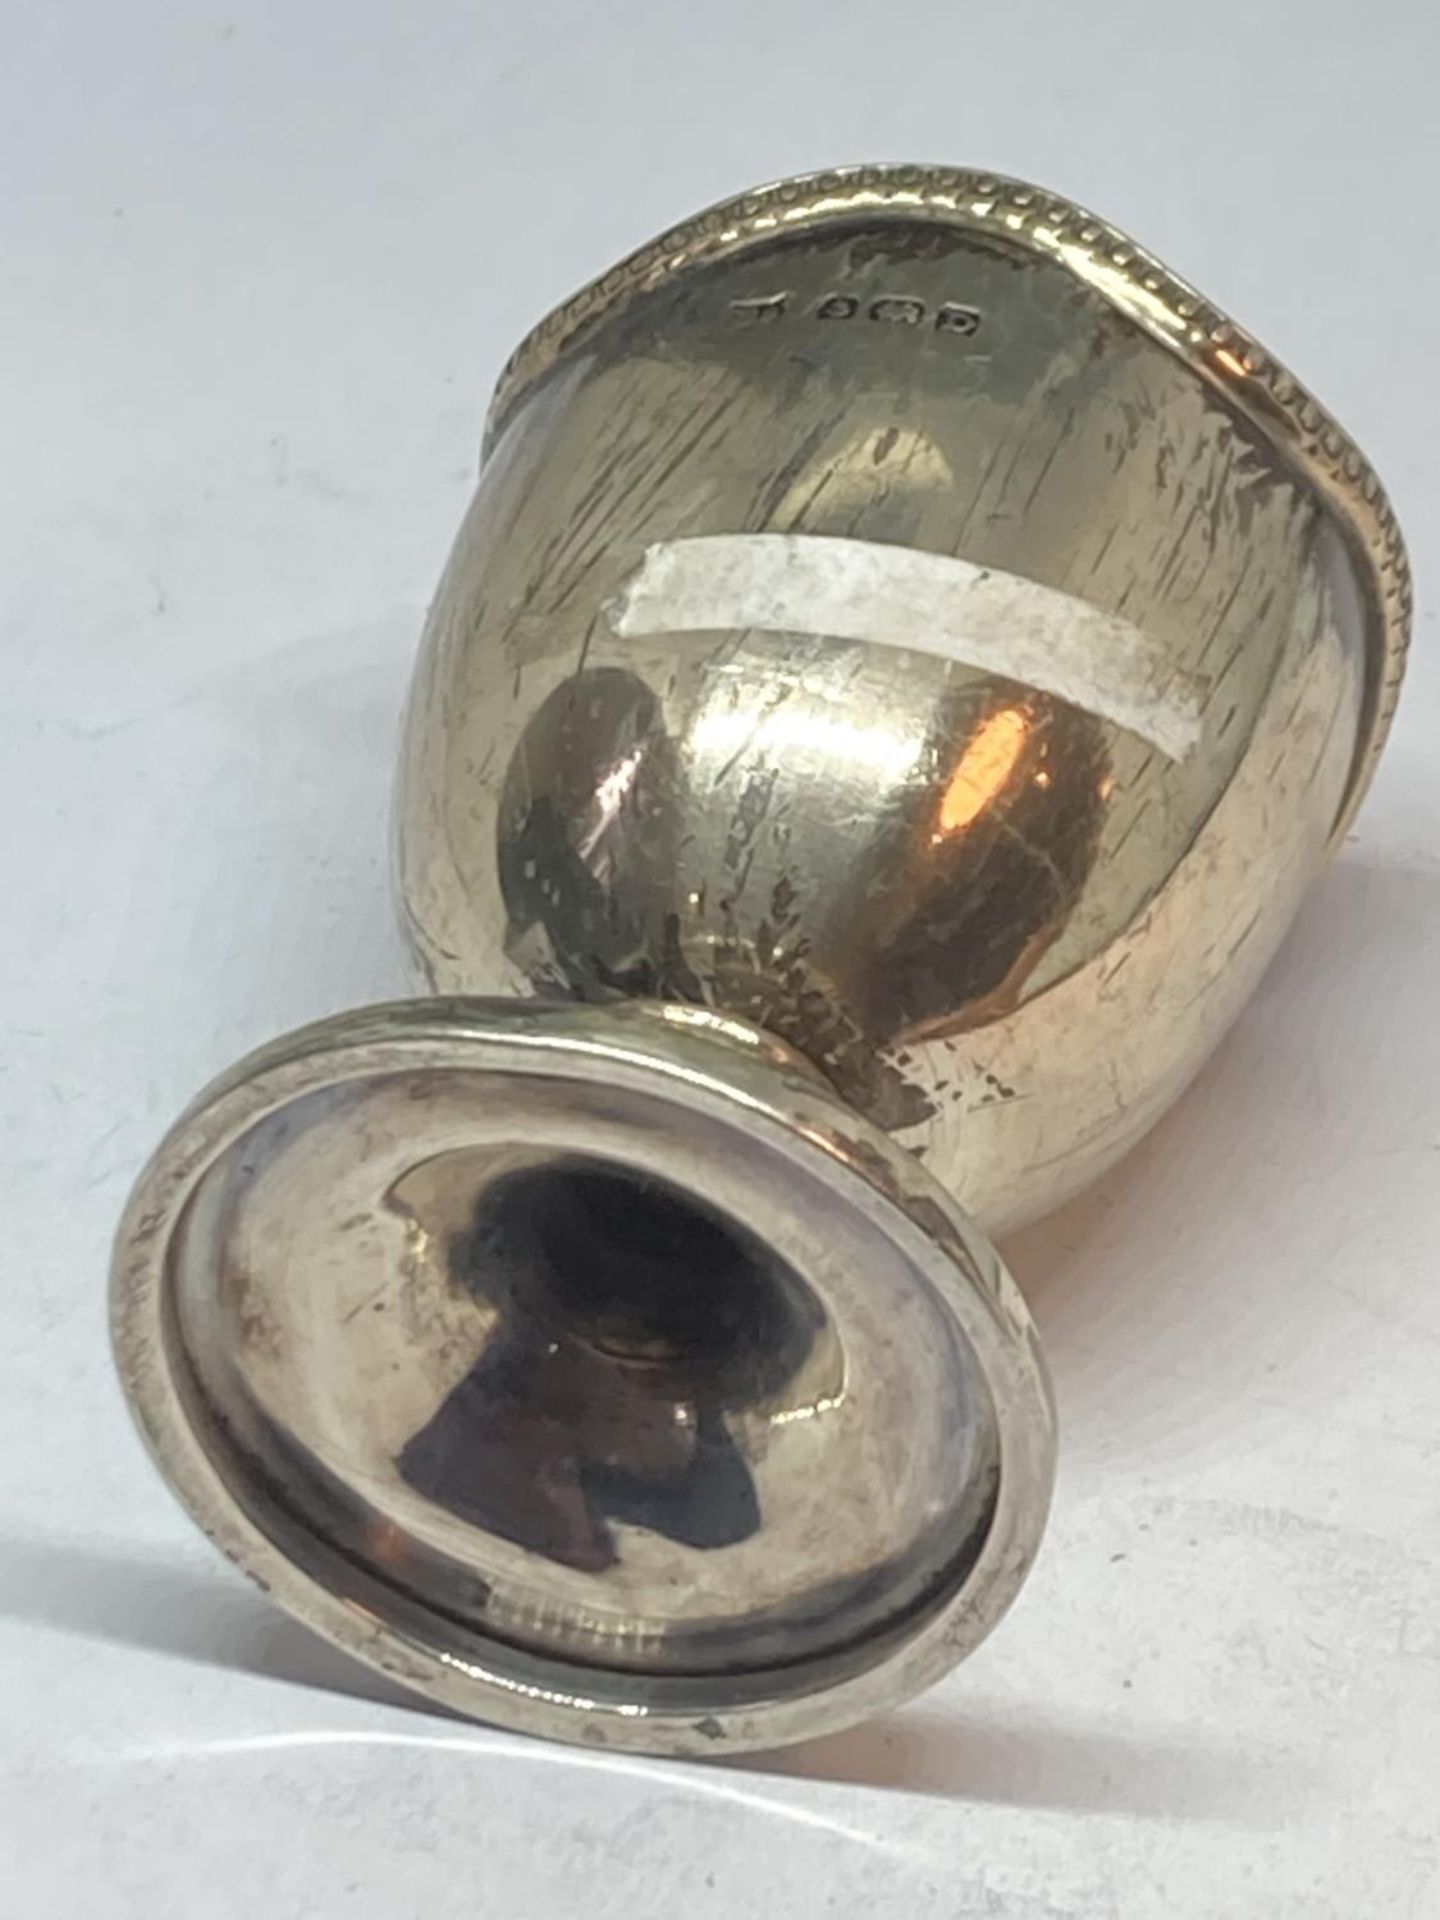 A HALLMARKED BIRMINGHAM SILVER EGG CUP GROSS WEIGHT 38.4 GRAMS - Image 4 of 4